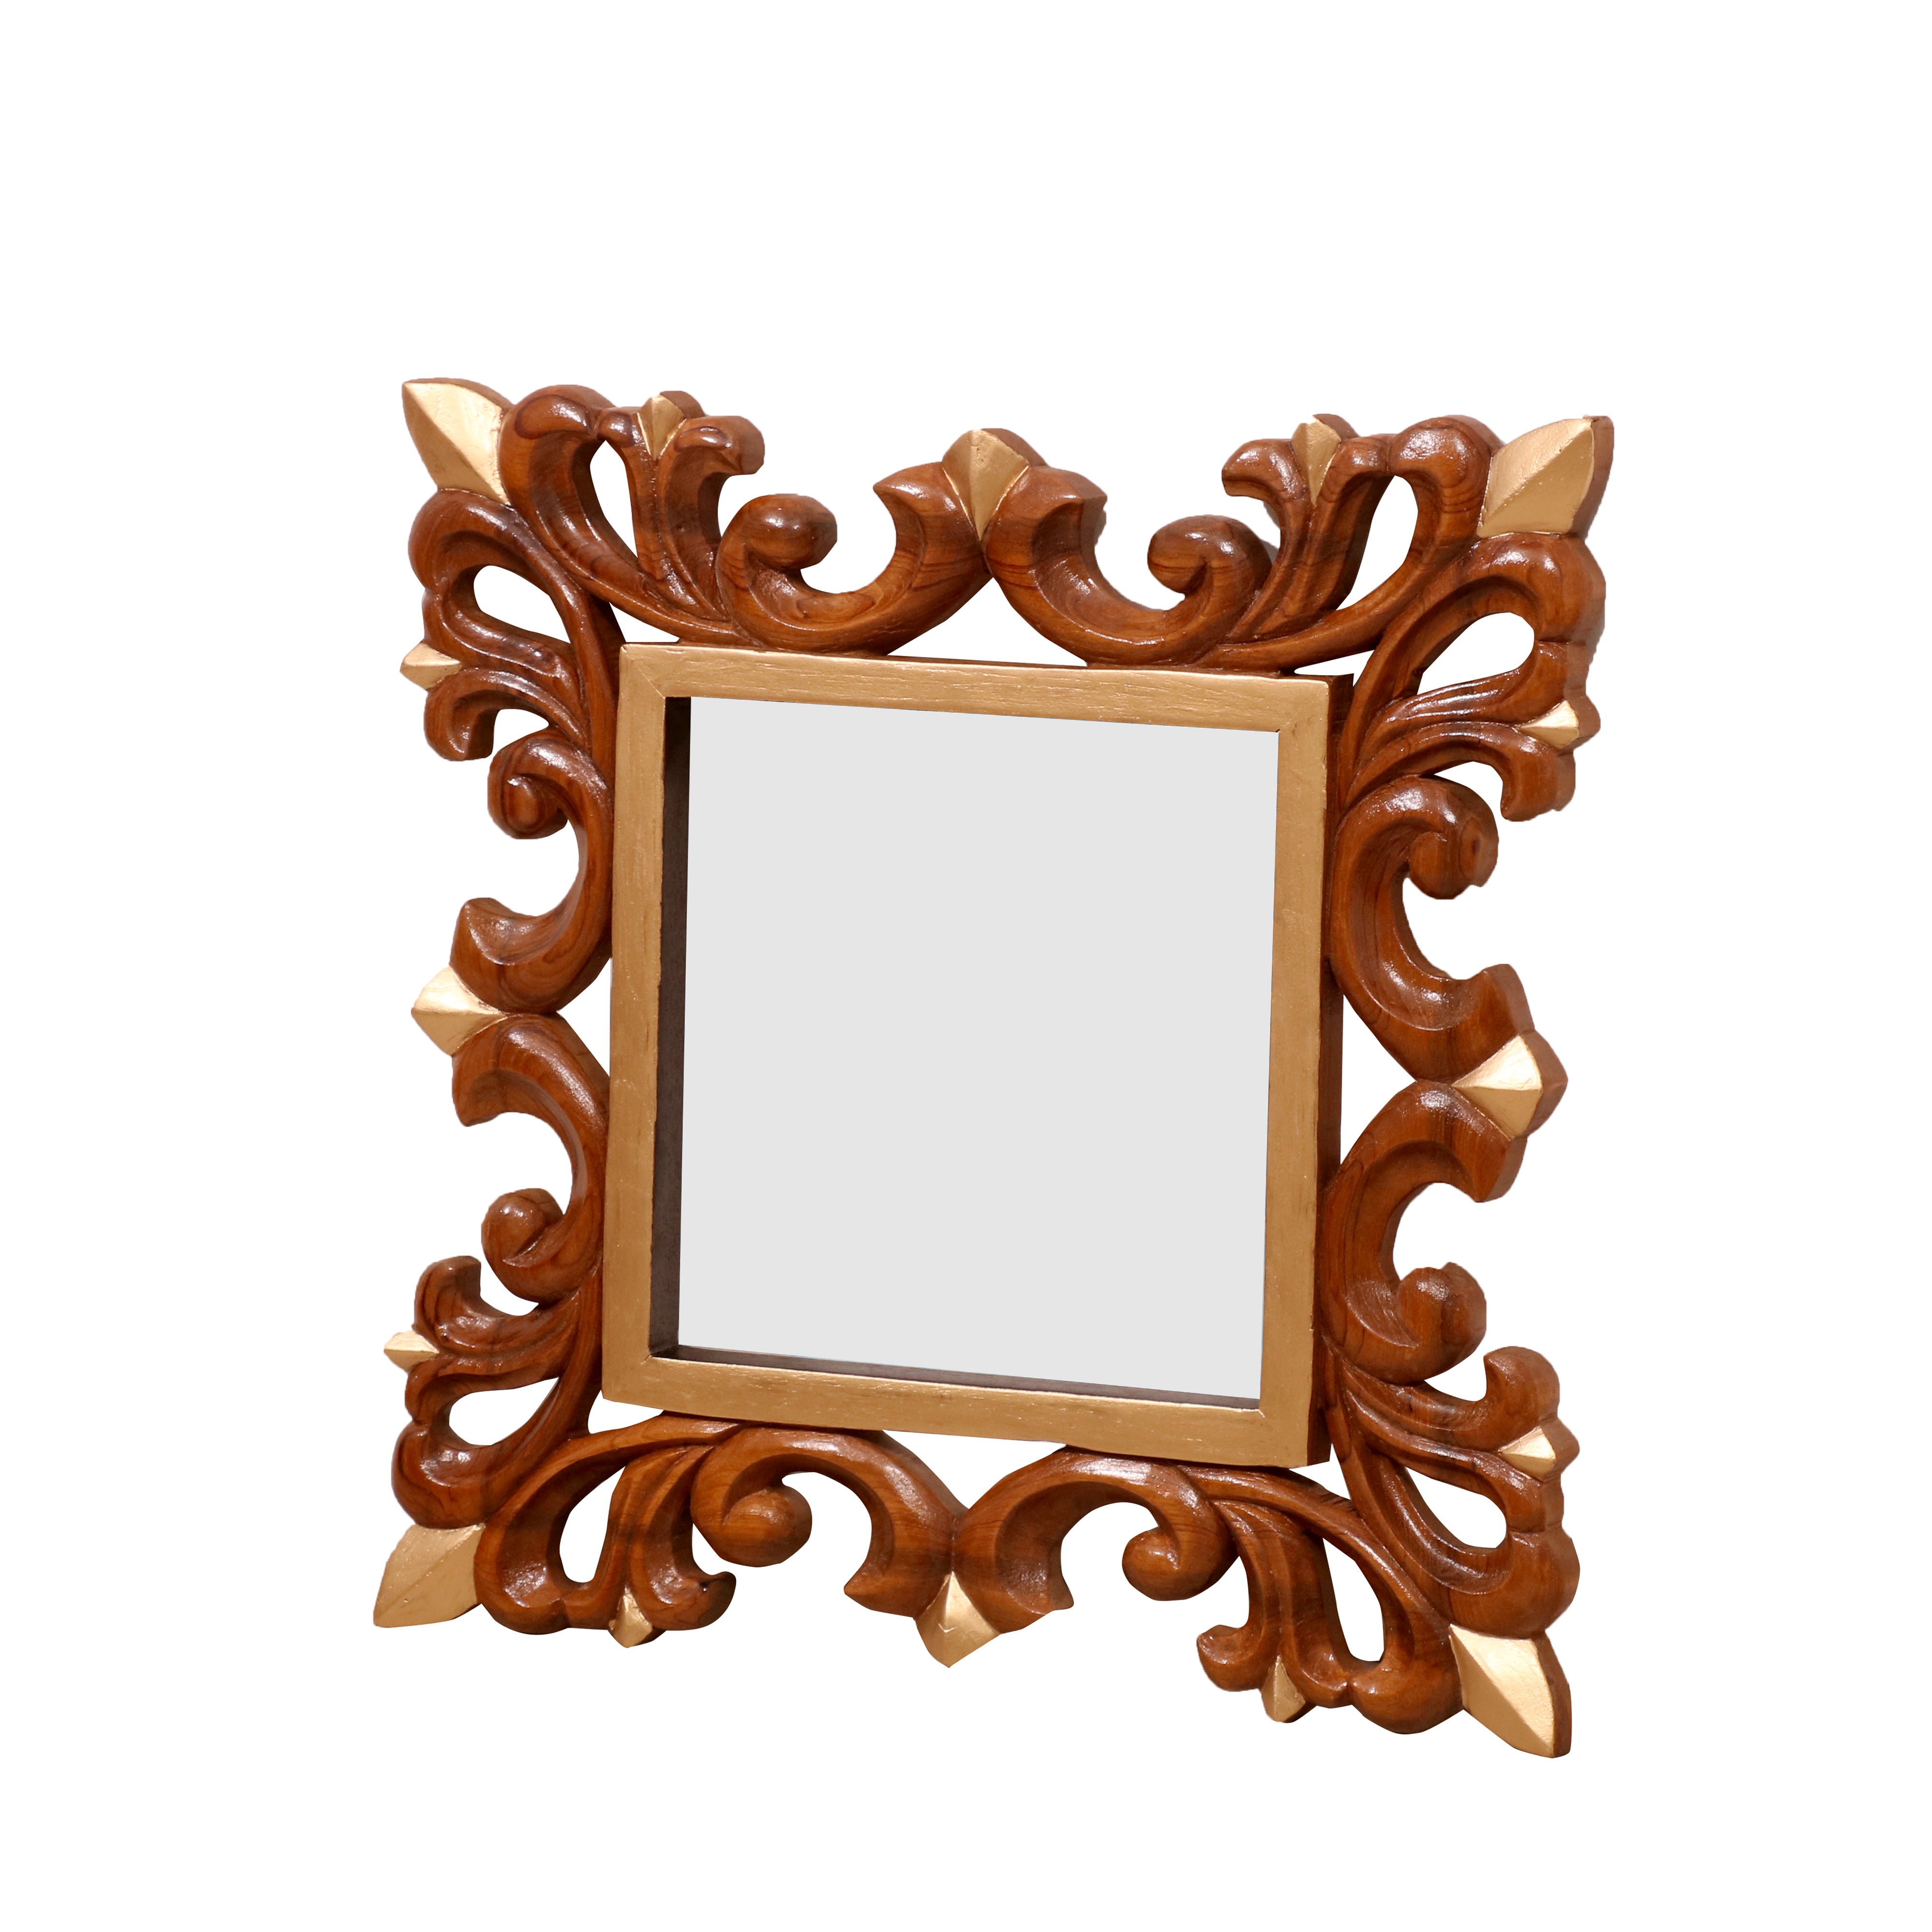 Wooden Square Mirror leaf style Mirror